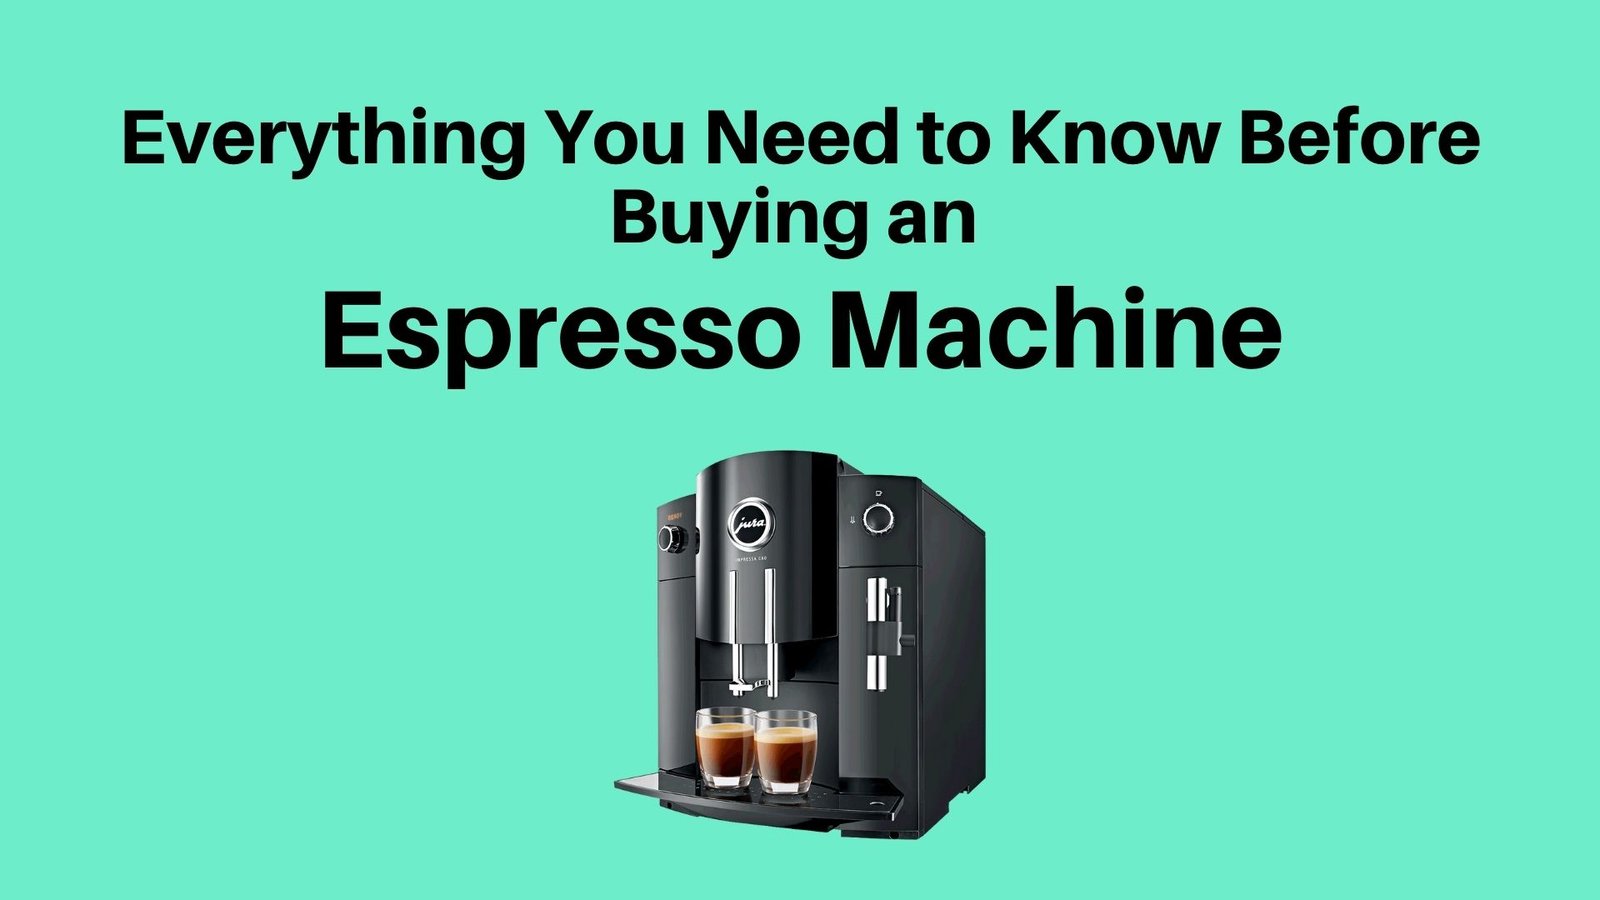 Everything You Need to Know Before Buying an Espresso Machine